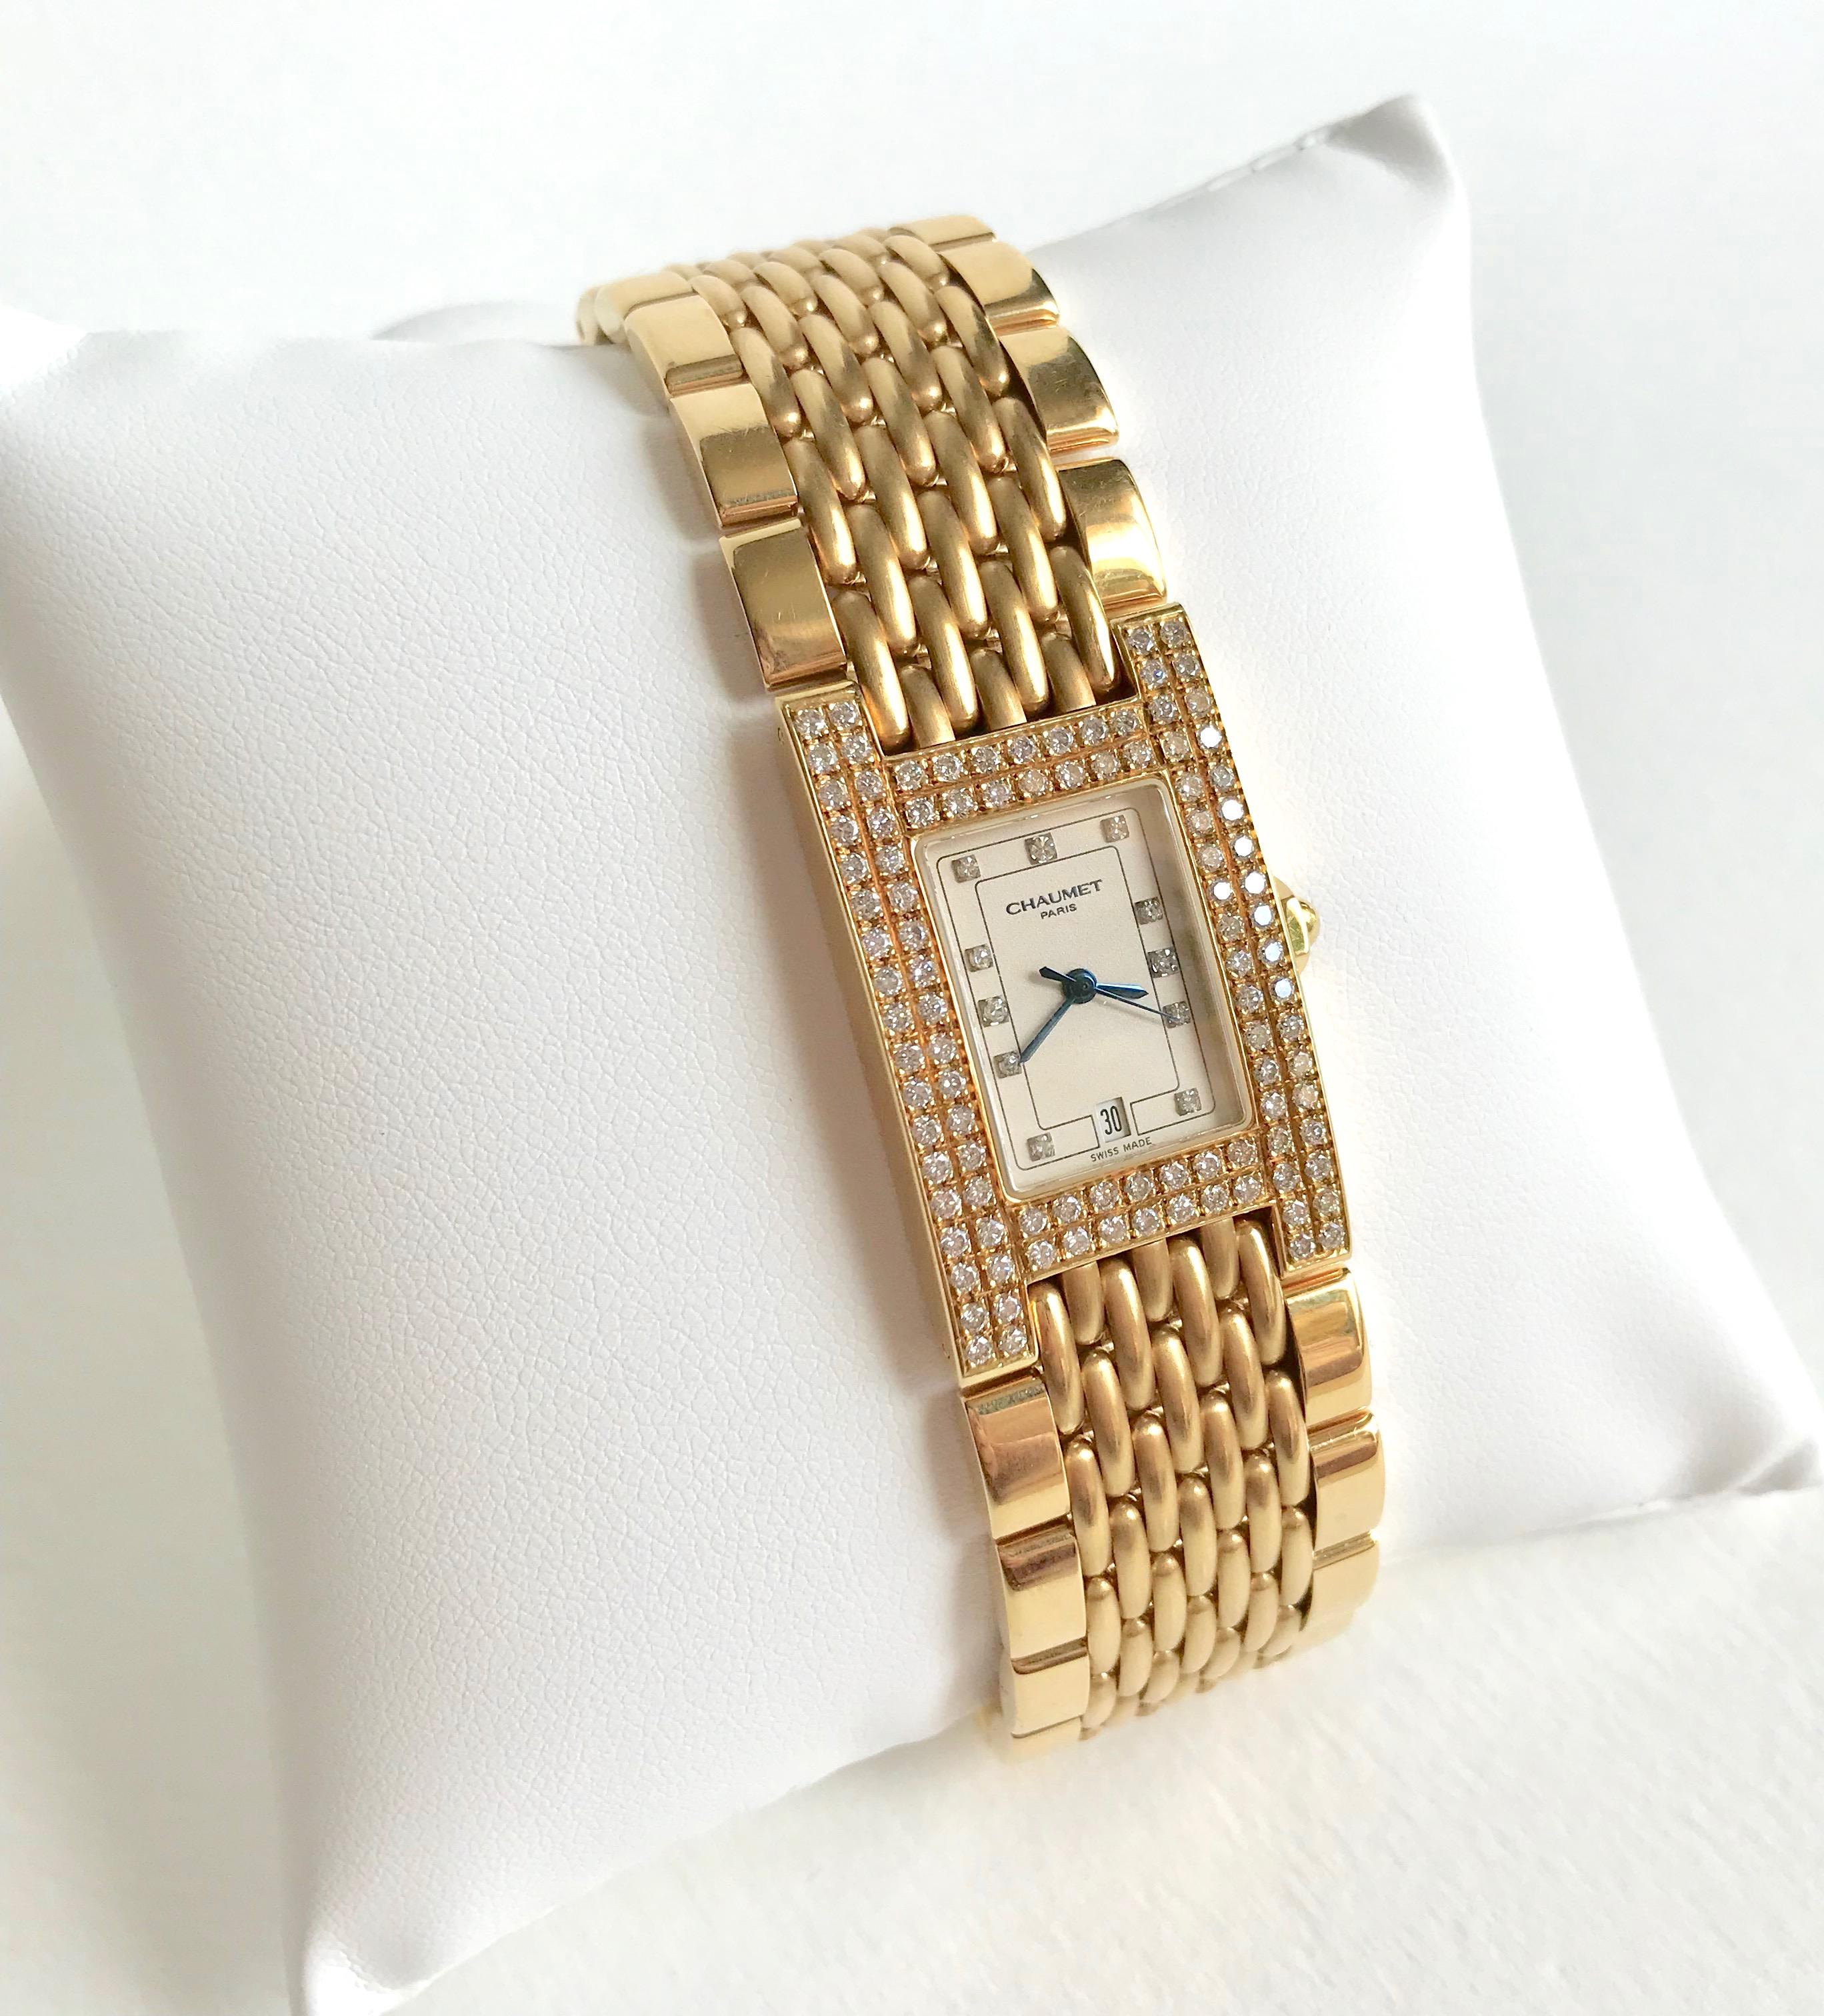 Woman's wristwatch in 18K GOLD and diamonds from the house of CHAUMET. Model Style.
Watch length for a 16.5 cm wrist
Watch width 23 mm Dial height: 3.6 cm
100 diamonds on the bezel weighing approximately 3 carats
Watch water-resistant to 30 m 11